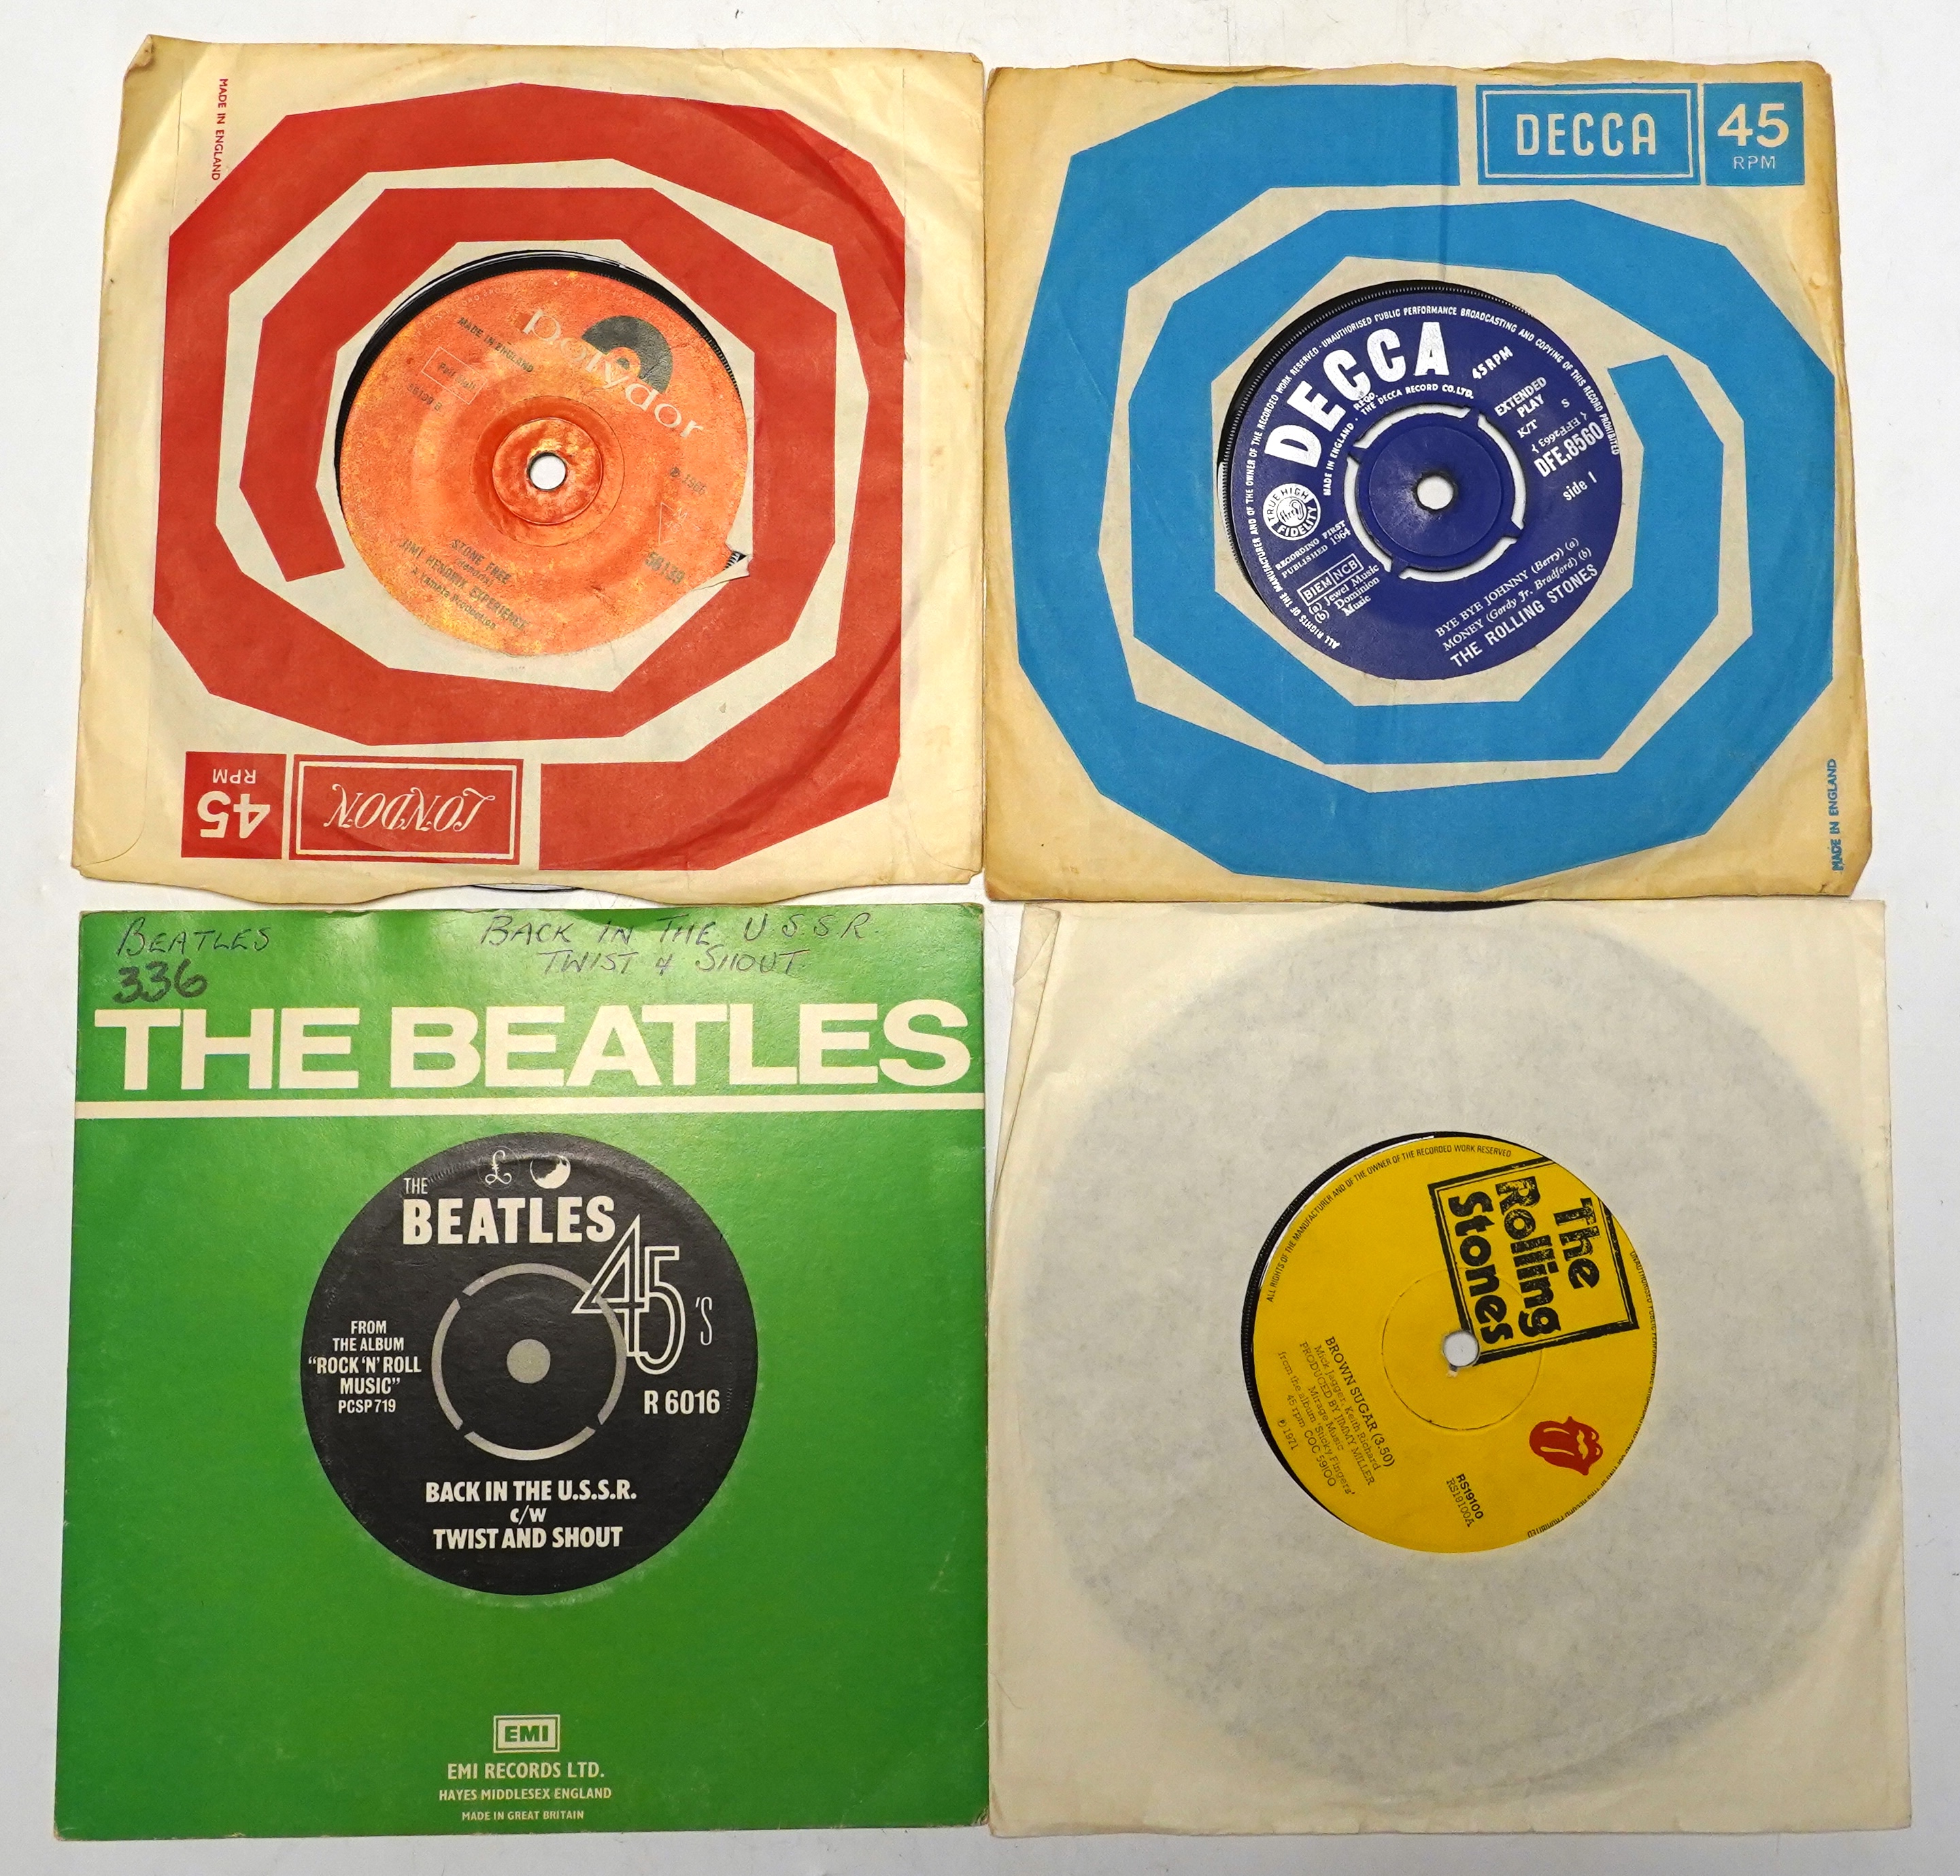 Two Tamla Motown demo 7” singles; Michael Jackson; Got To Be There, and Jr. Walker & the All Stars; Take Me Girl, both with printed demo labels, together with nine other 7” singles by The Beatles, The Rolling Stones and